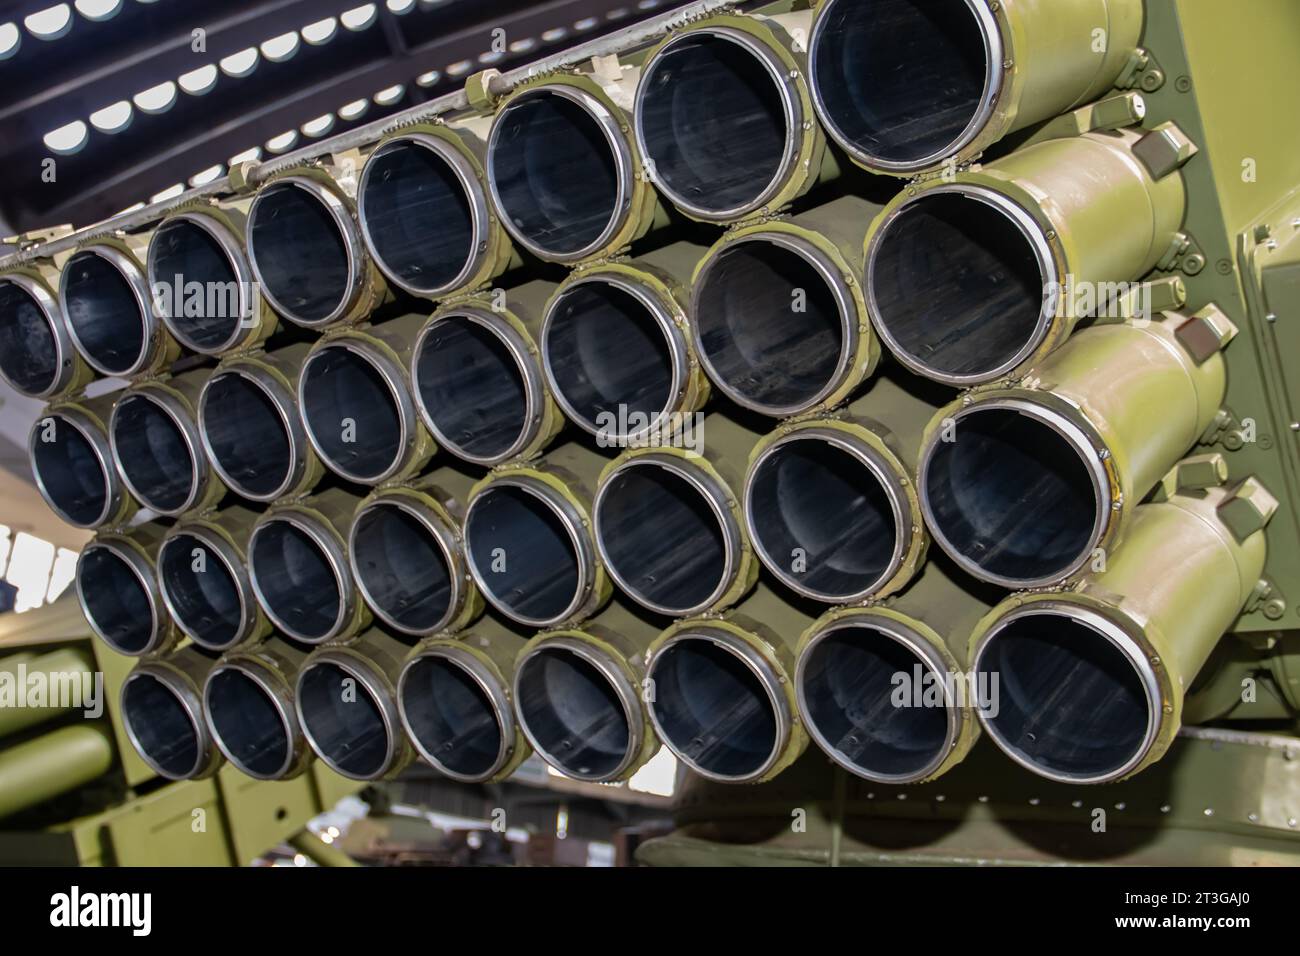 Multi-barrel rocket launcher (MRL) or multiple launch rocket system (MLRS) with32 launch tubes of caliber 128 mm, war military equipment, exposed Stock Photo